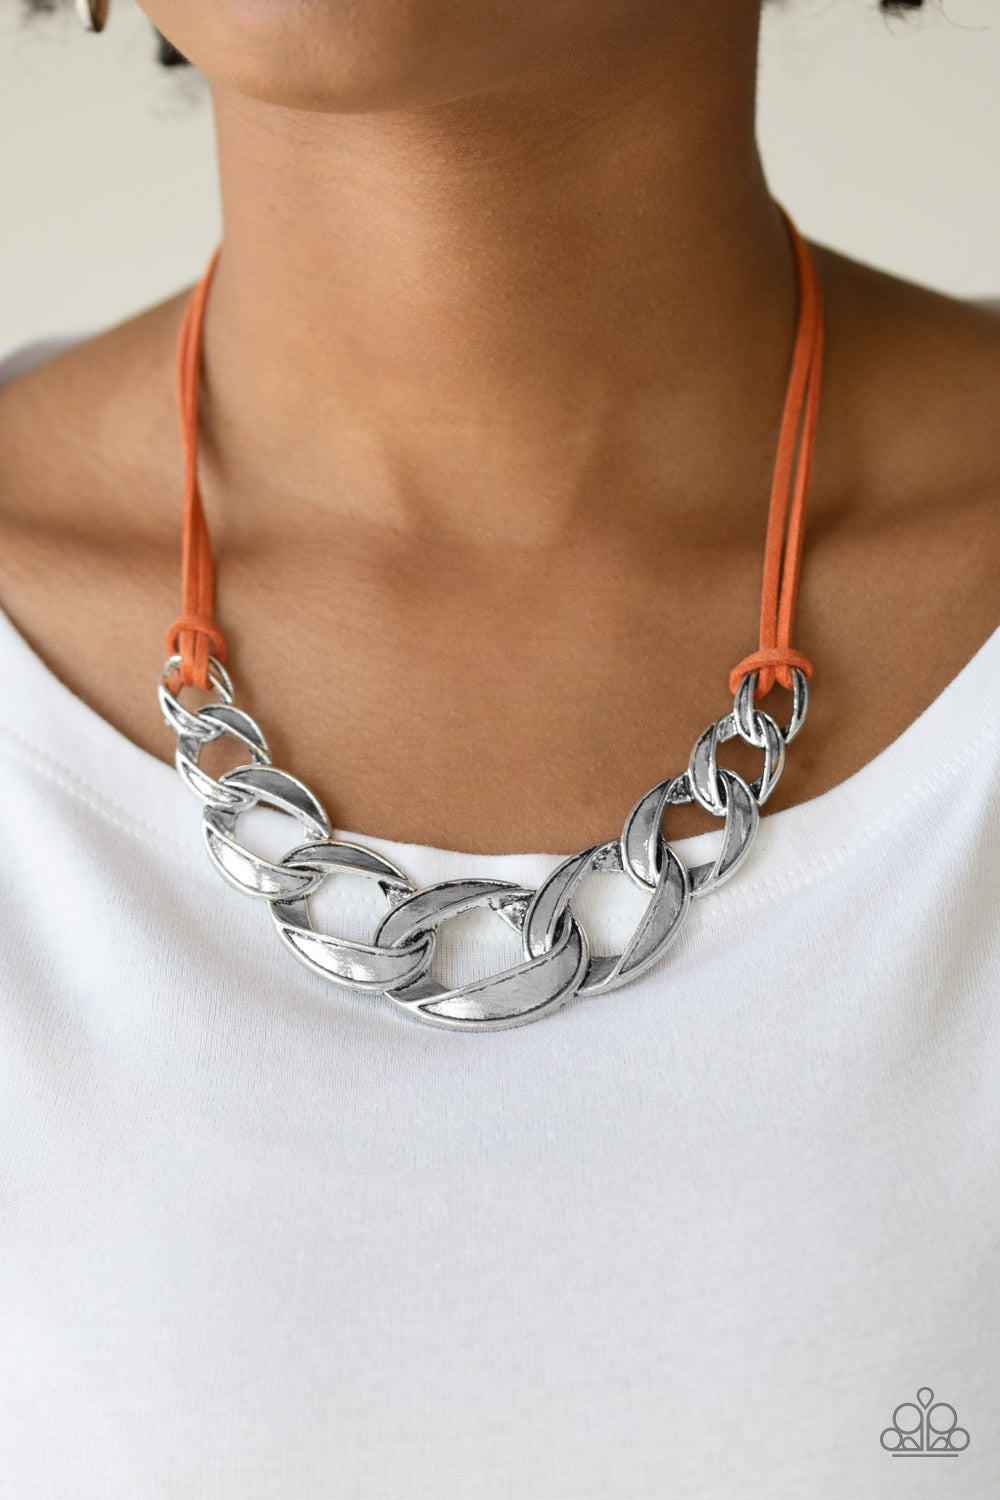 Naturally Natural - Orange Necklace